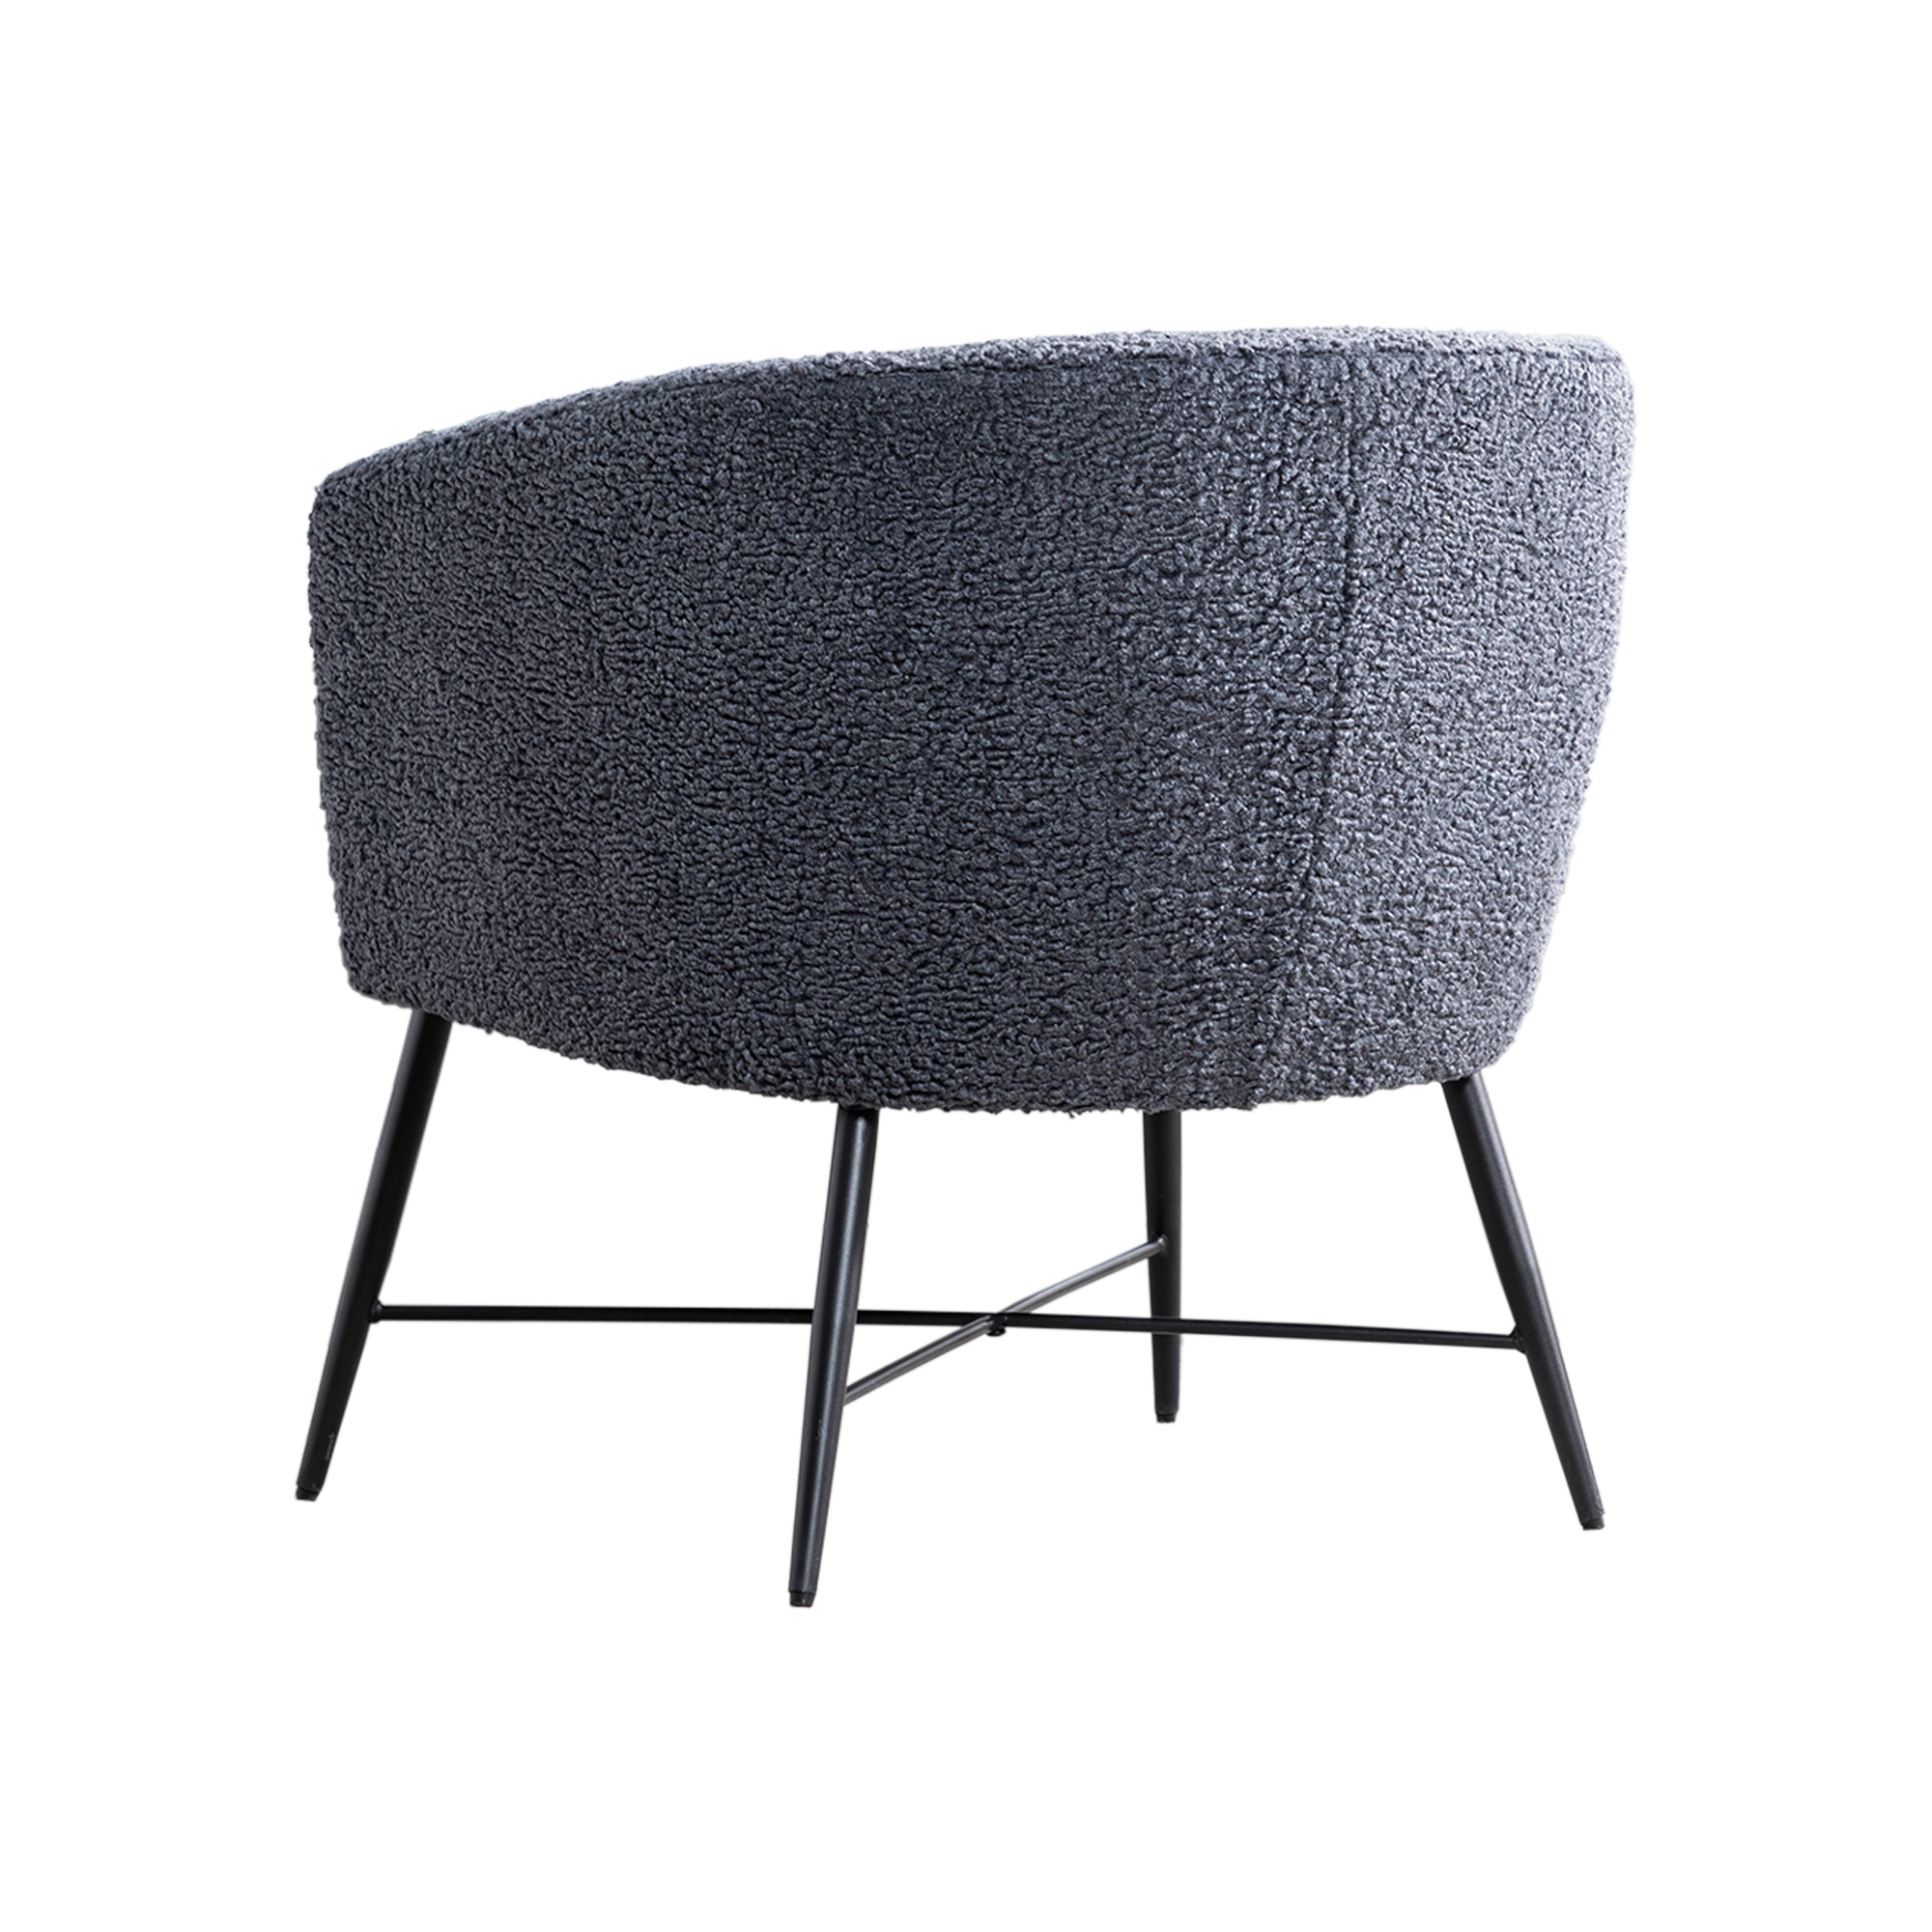 Ino 28 Inch Accent Chair, Gray Wool Like Fabric, Curved Back, Shelter Arms - Saltoro Sherpi